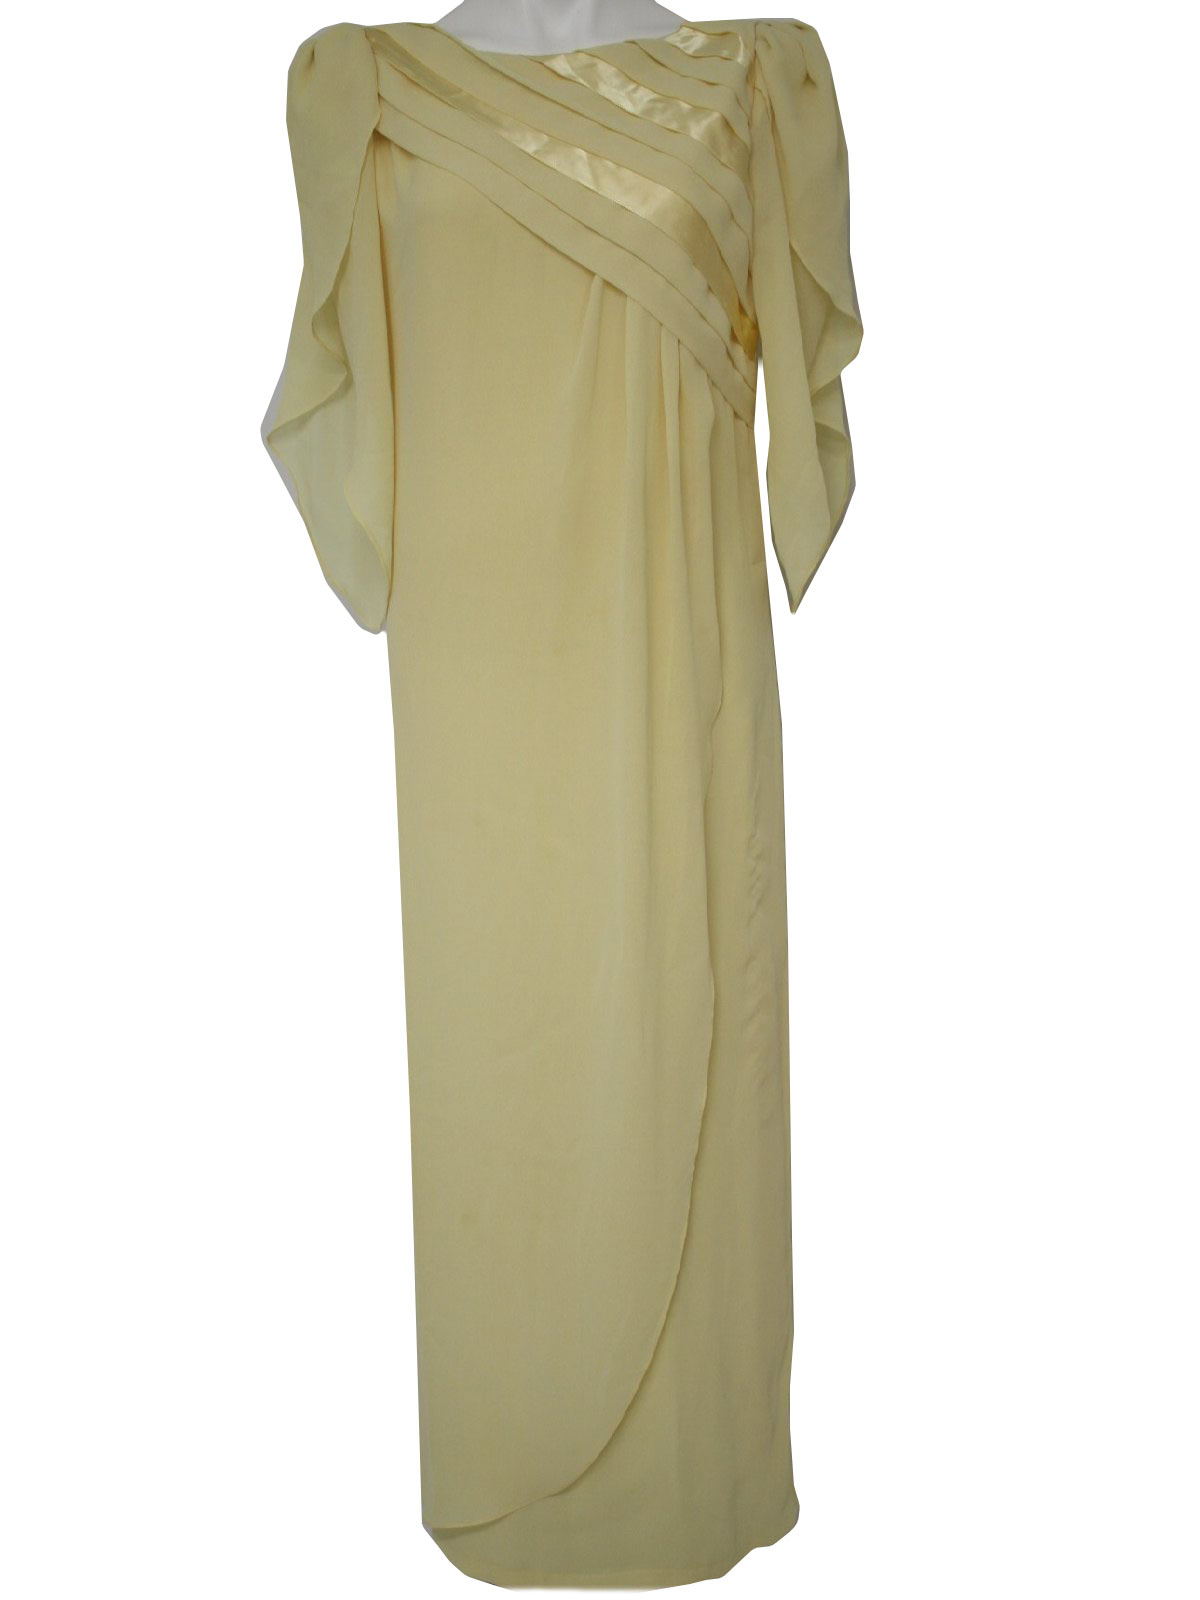 70s -JCPenney- Womens baby yellow, silky synthetic, floor length dress ...